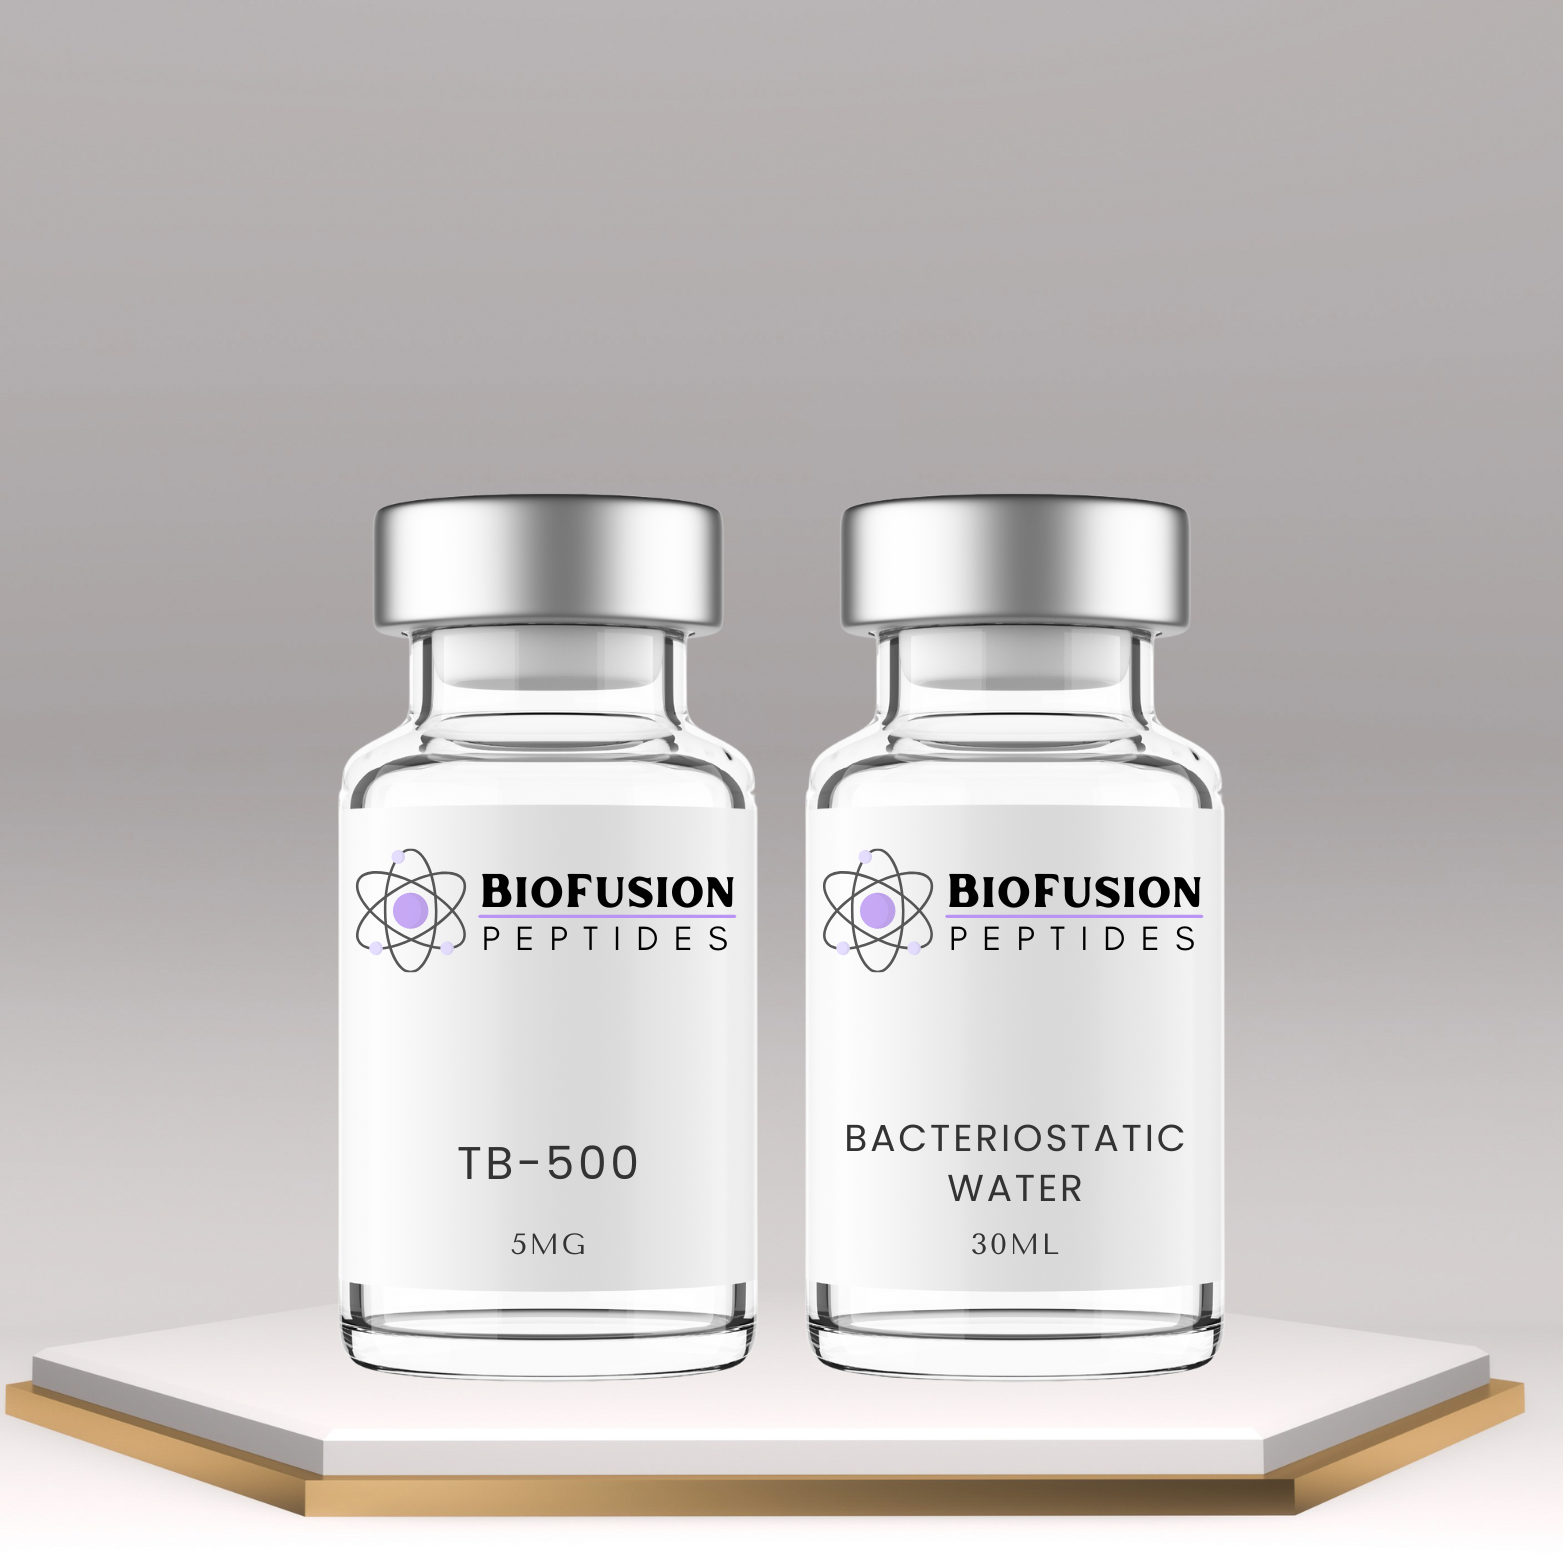 BioFusion Peptides TB-500 kit with bacteriostatic water